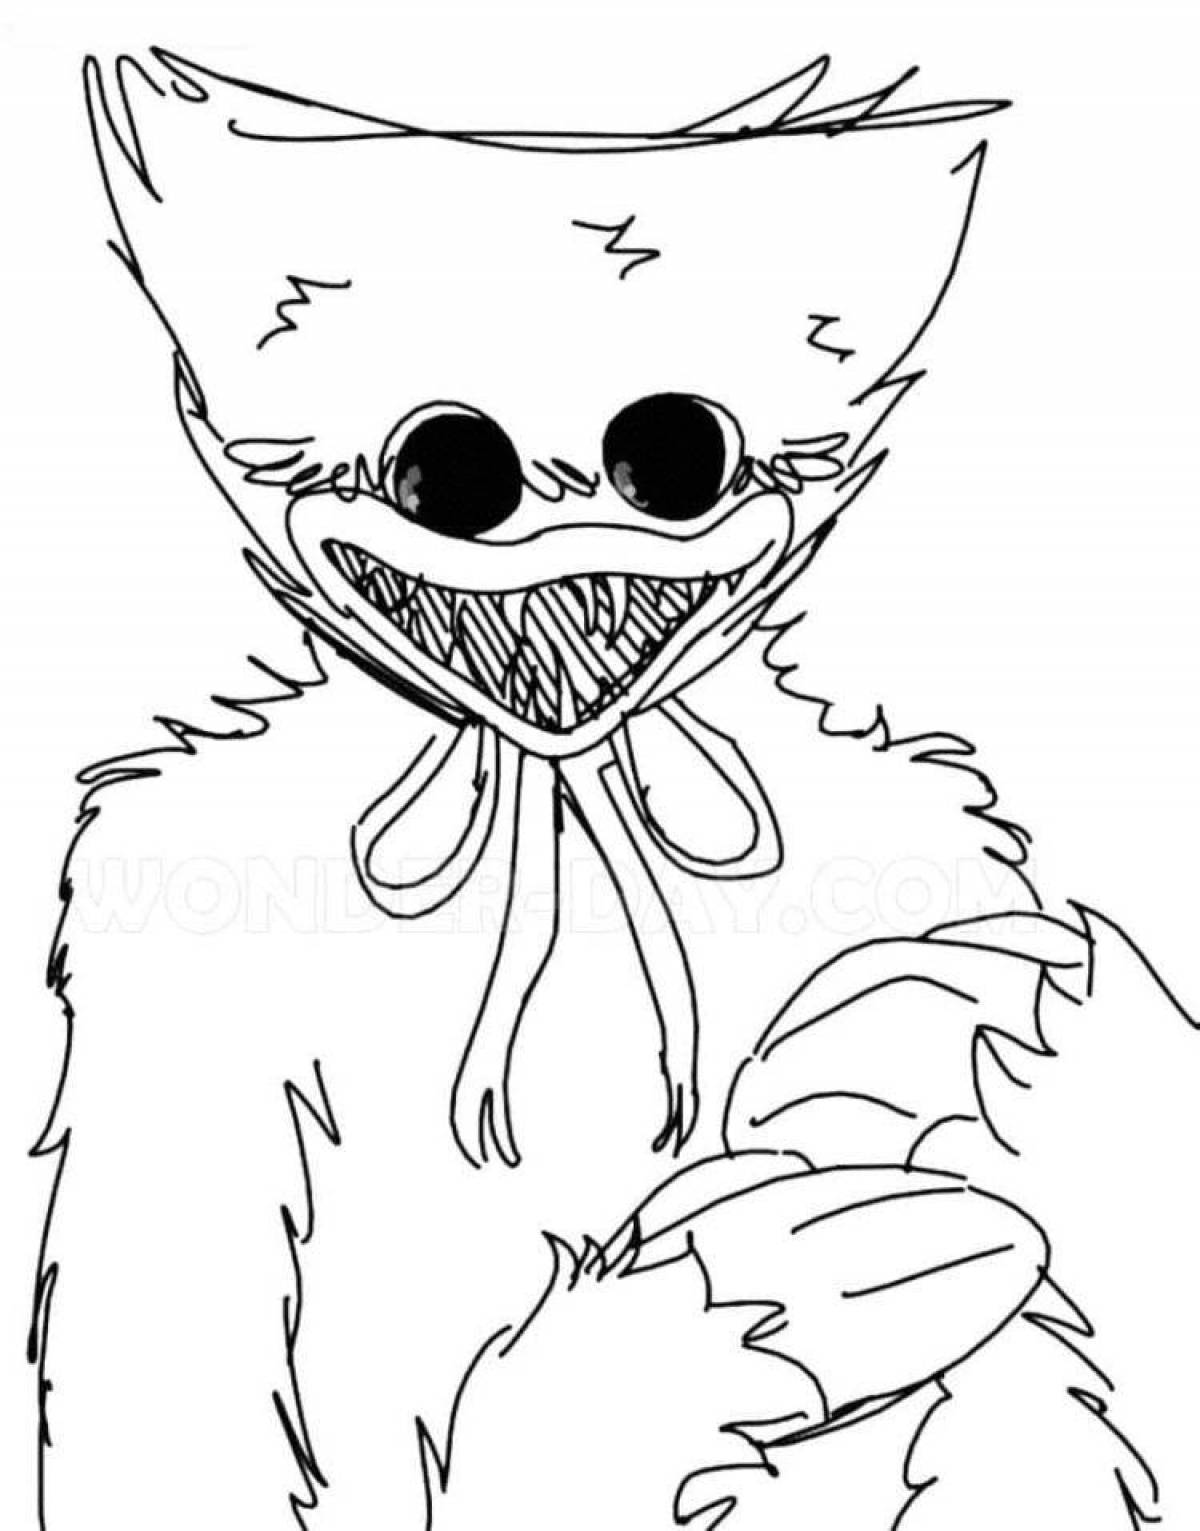 Vibrant killy willy coloring page